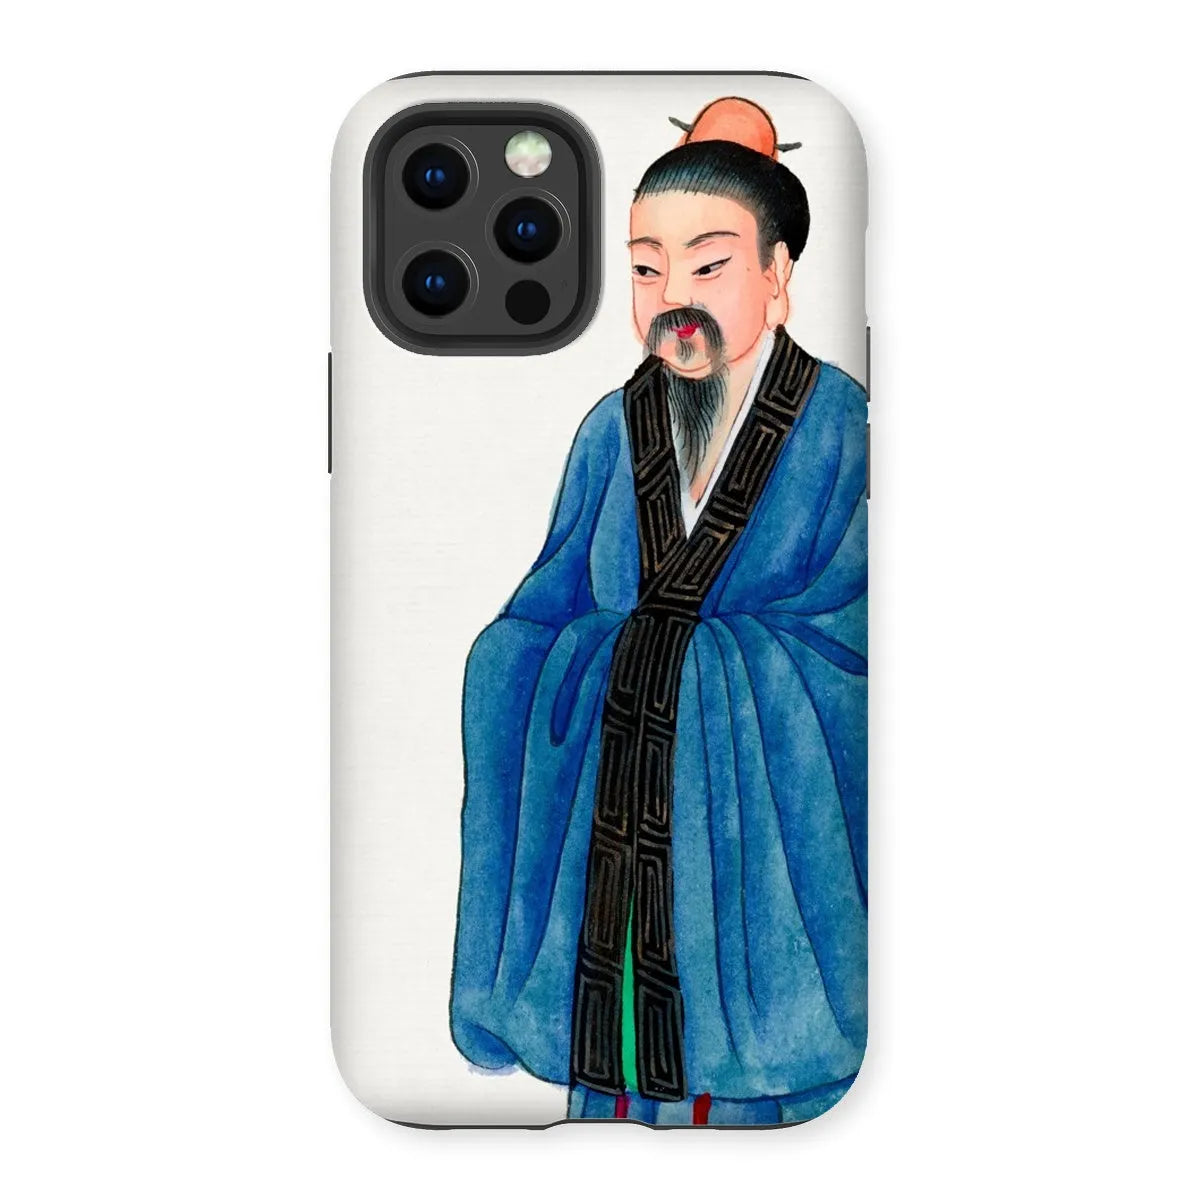 Grand Master - Chinese Buddhist Aesthetic Art Phone Case - Iphone 12 Pro / Matte - Mobile Phone Cases - Aesthetic Art